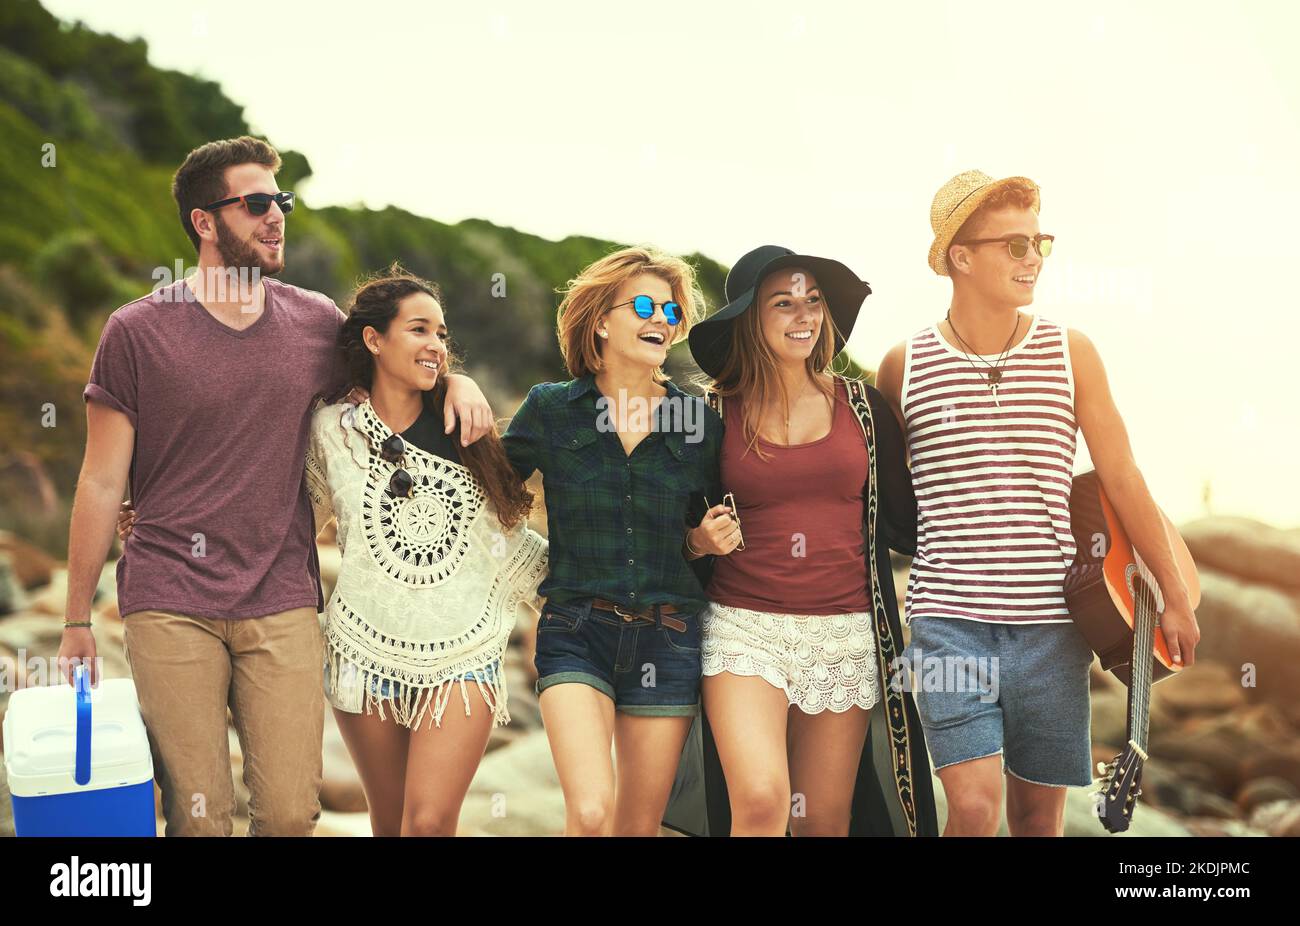 Looks like a big beach day. a group of friends walking on the beach on a summers day. Stock Photo